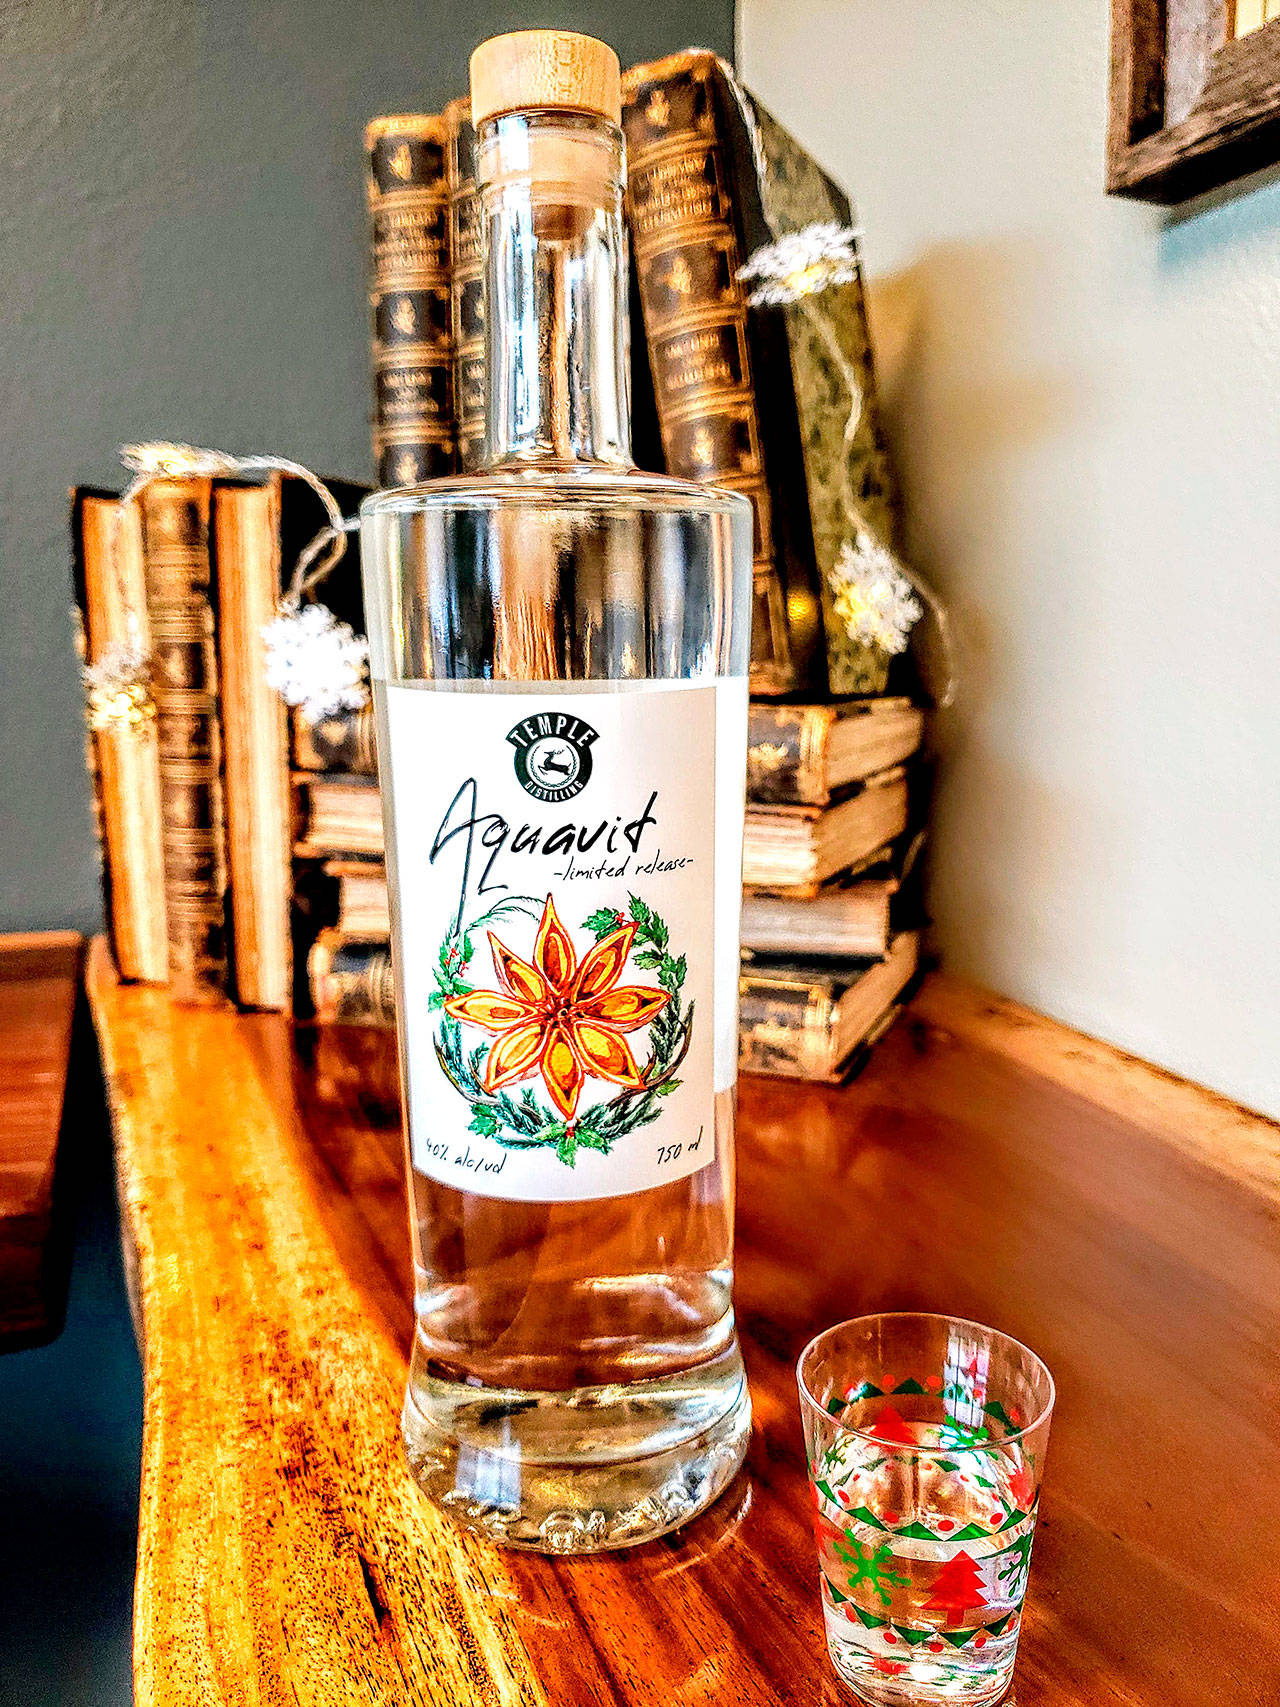 Temple Distilling will be pouring its new aquavit, a traditional Scandinavian spirit, at its anniversary and release party. (AJ Temple)